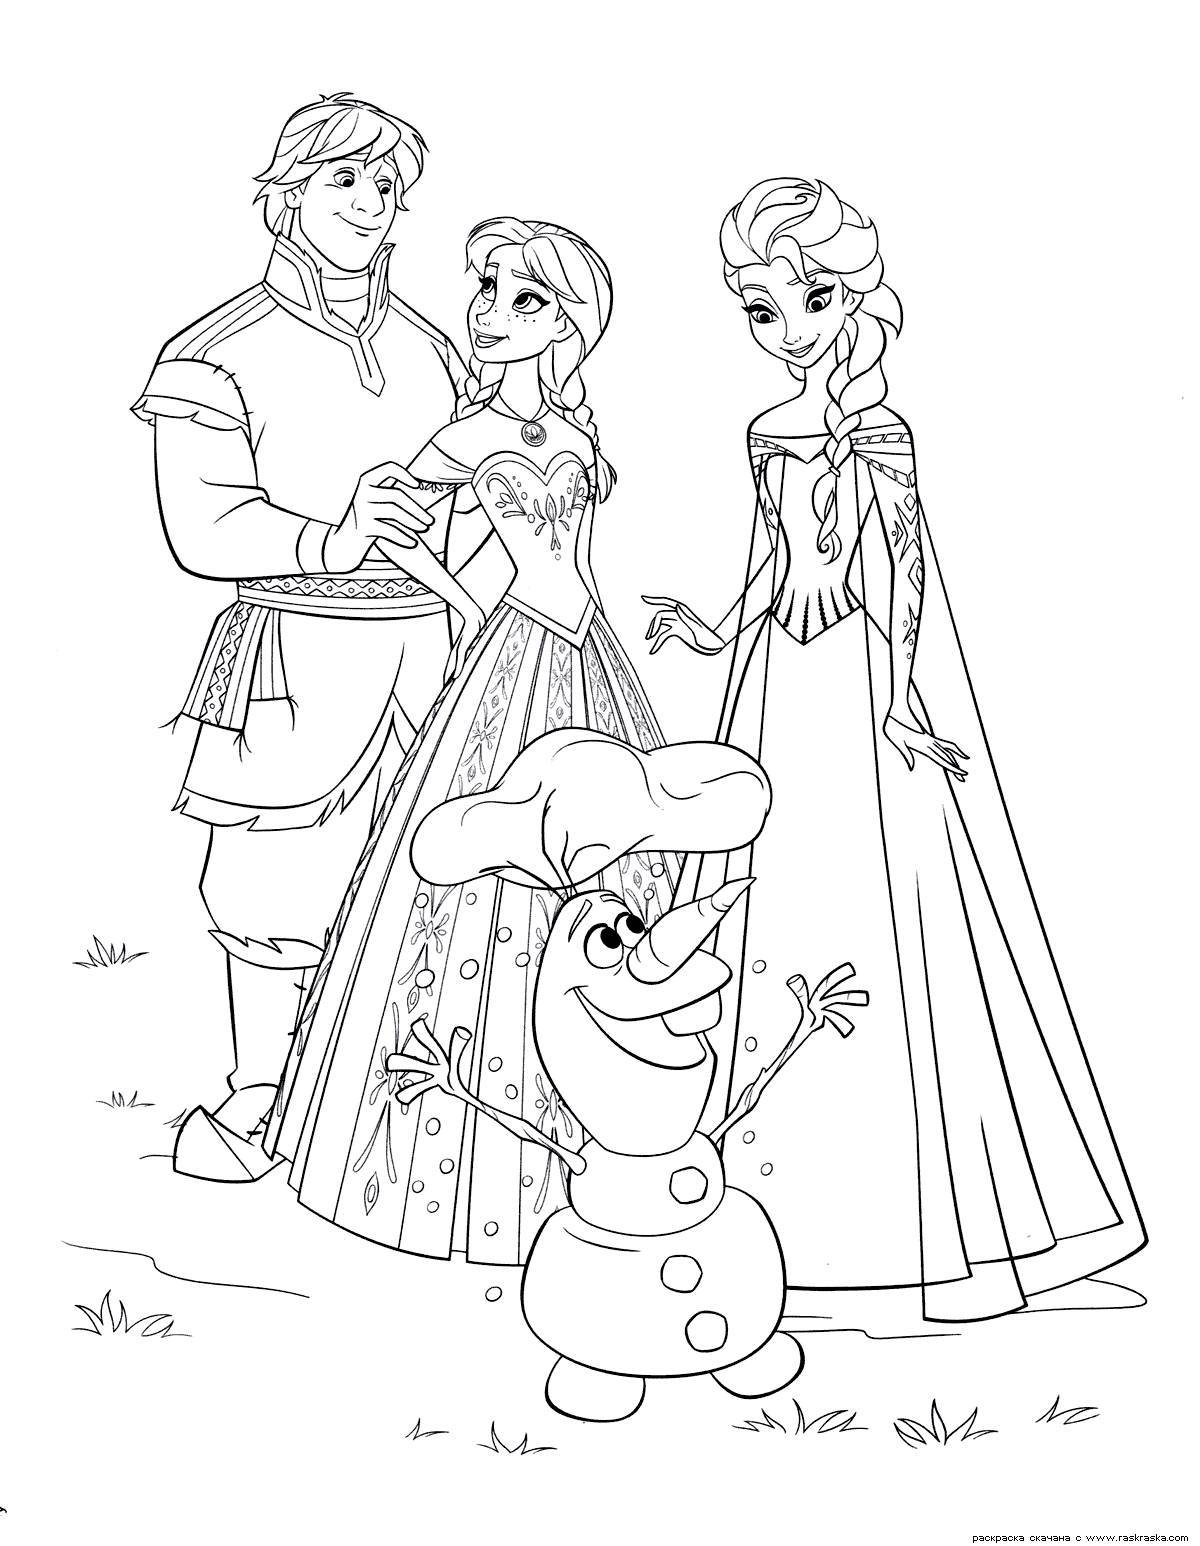 Awesome elsa and anna coloring pages for kids